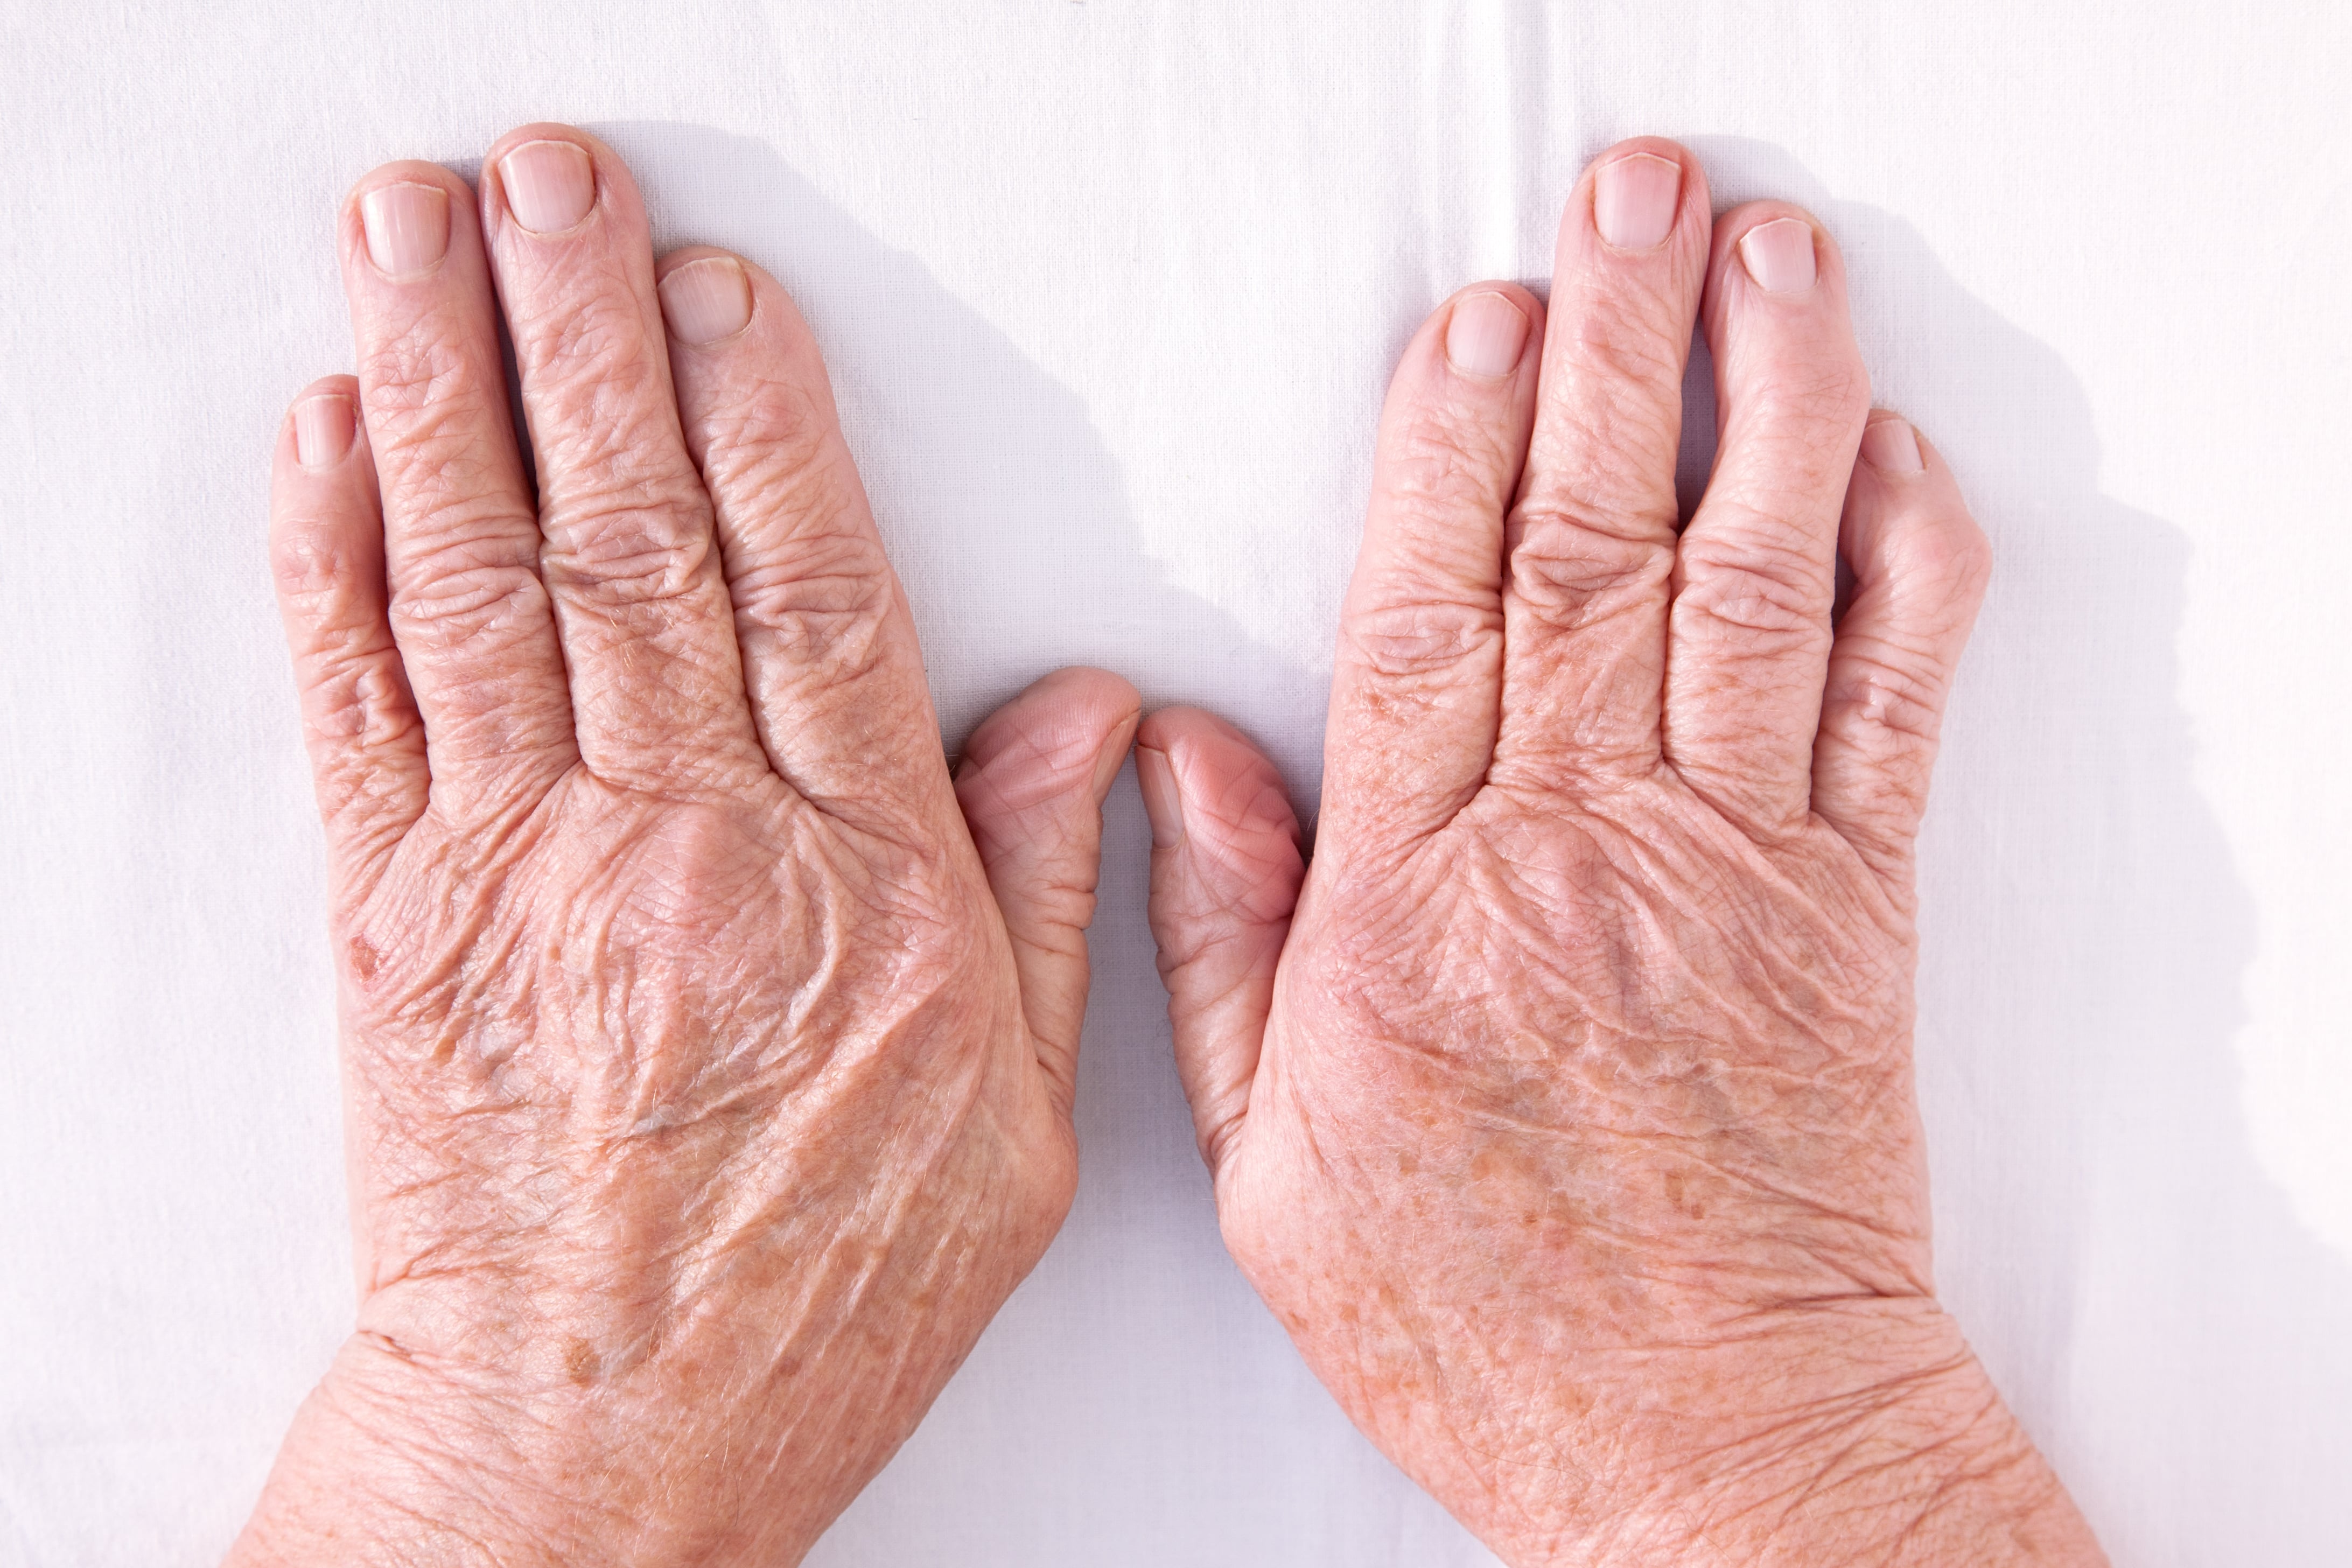 An old, wrinkled pair of hands